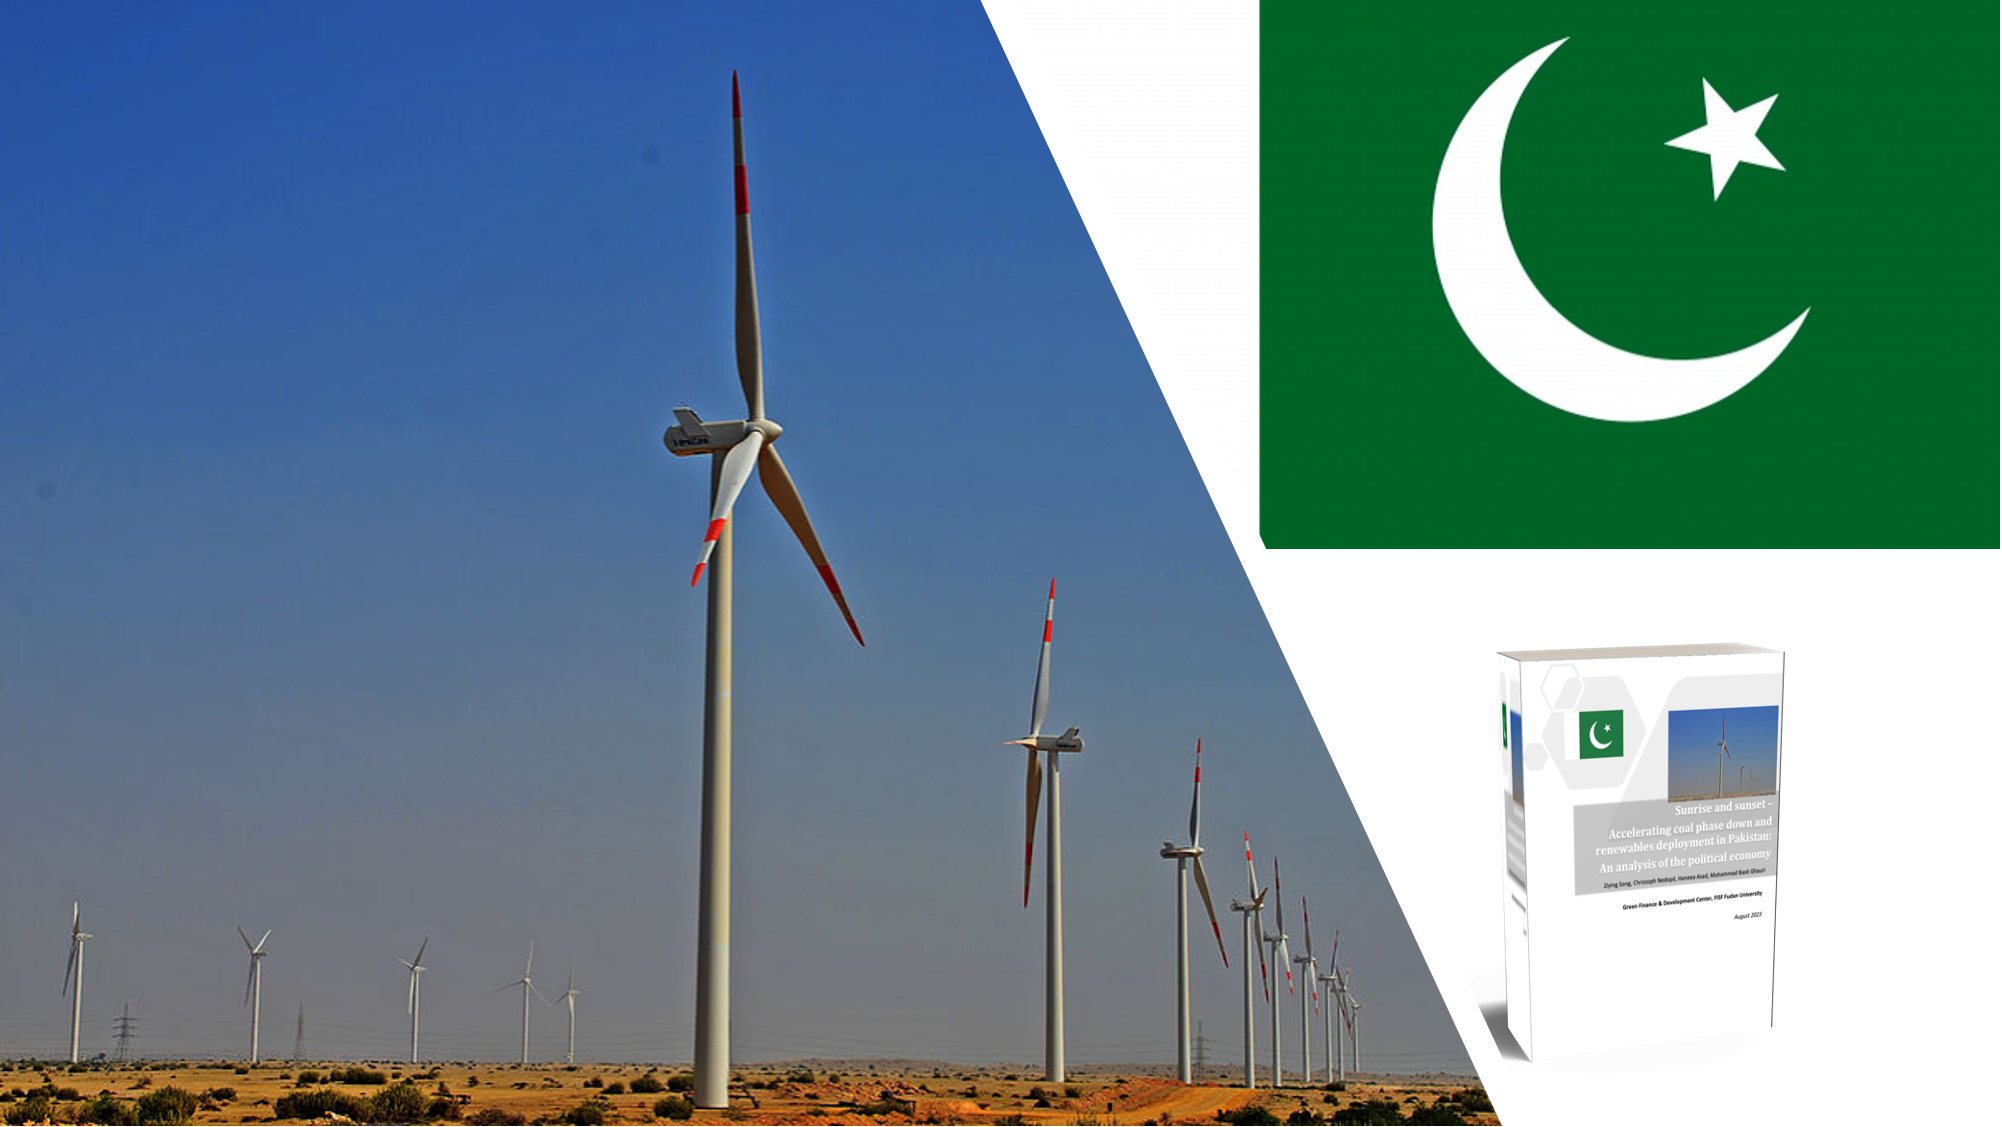 Ziying Song, Christoph Nedopil, Haneea Asad, Muhammad Basit Ghauri (2023): “Sunrise and sunset – Accelerating coal phase down and green energy deployment in Pakistan: An analysis of the political economy”, Green Finance & Development Center, FISF Fudan University, Shanghai, China